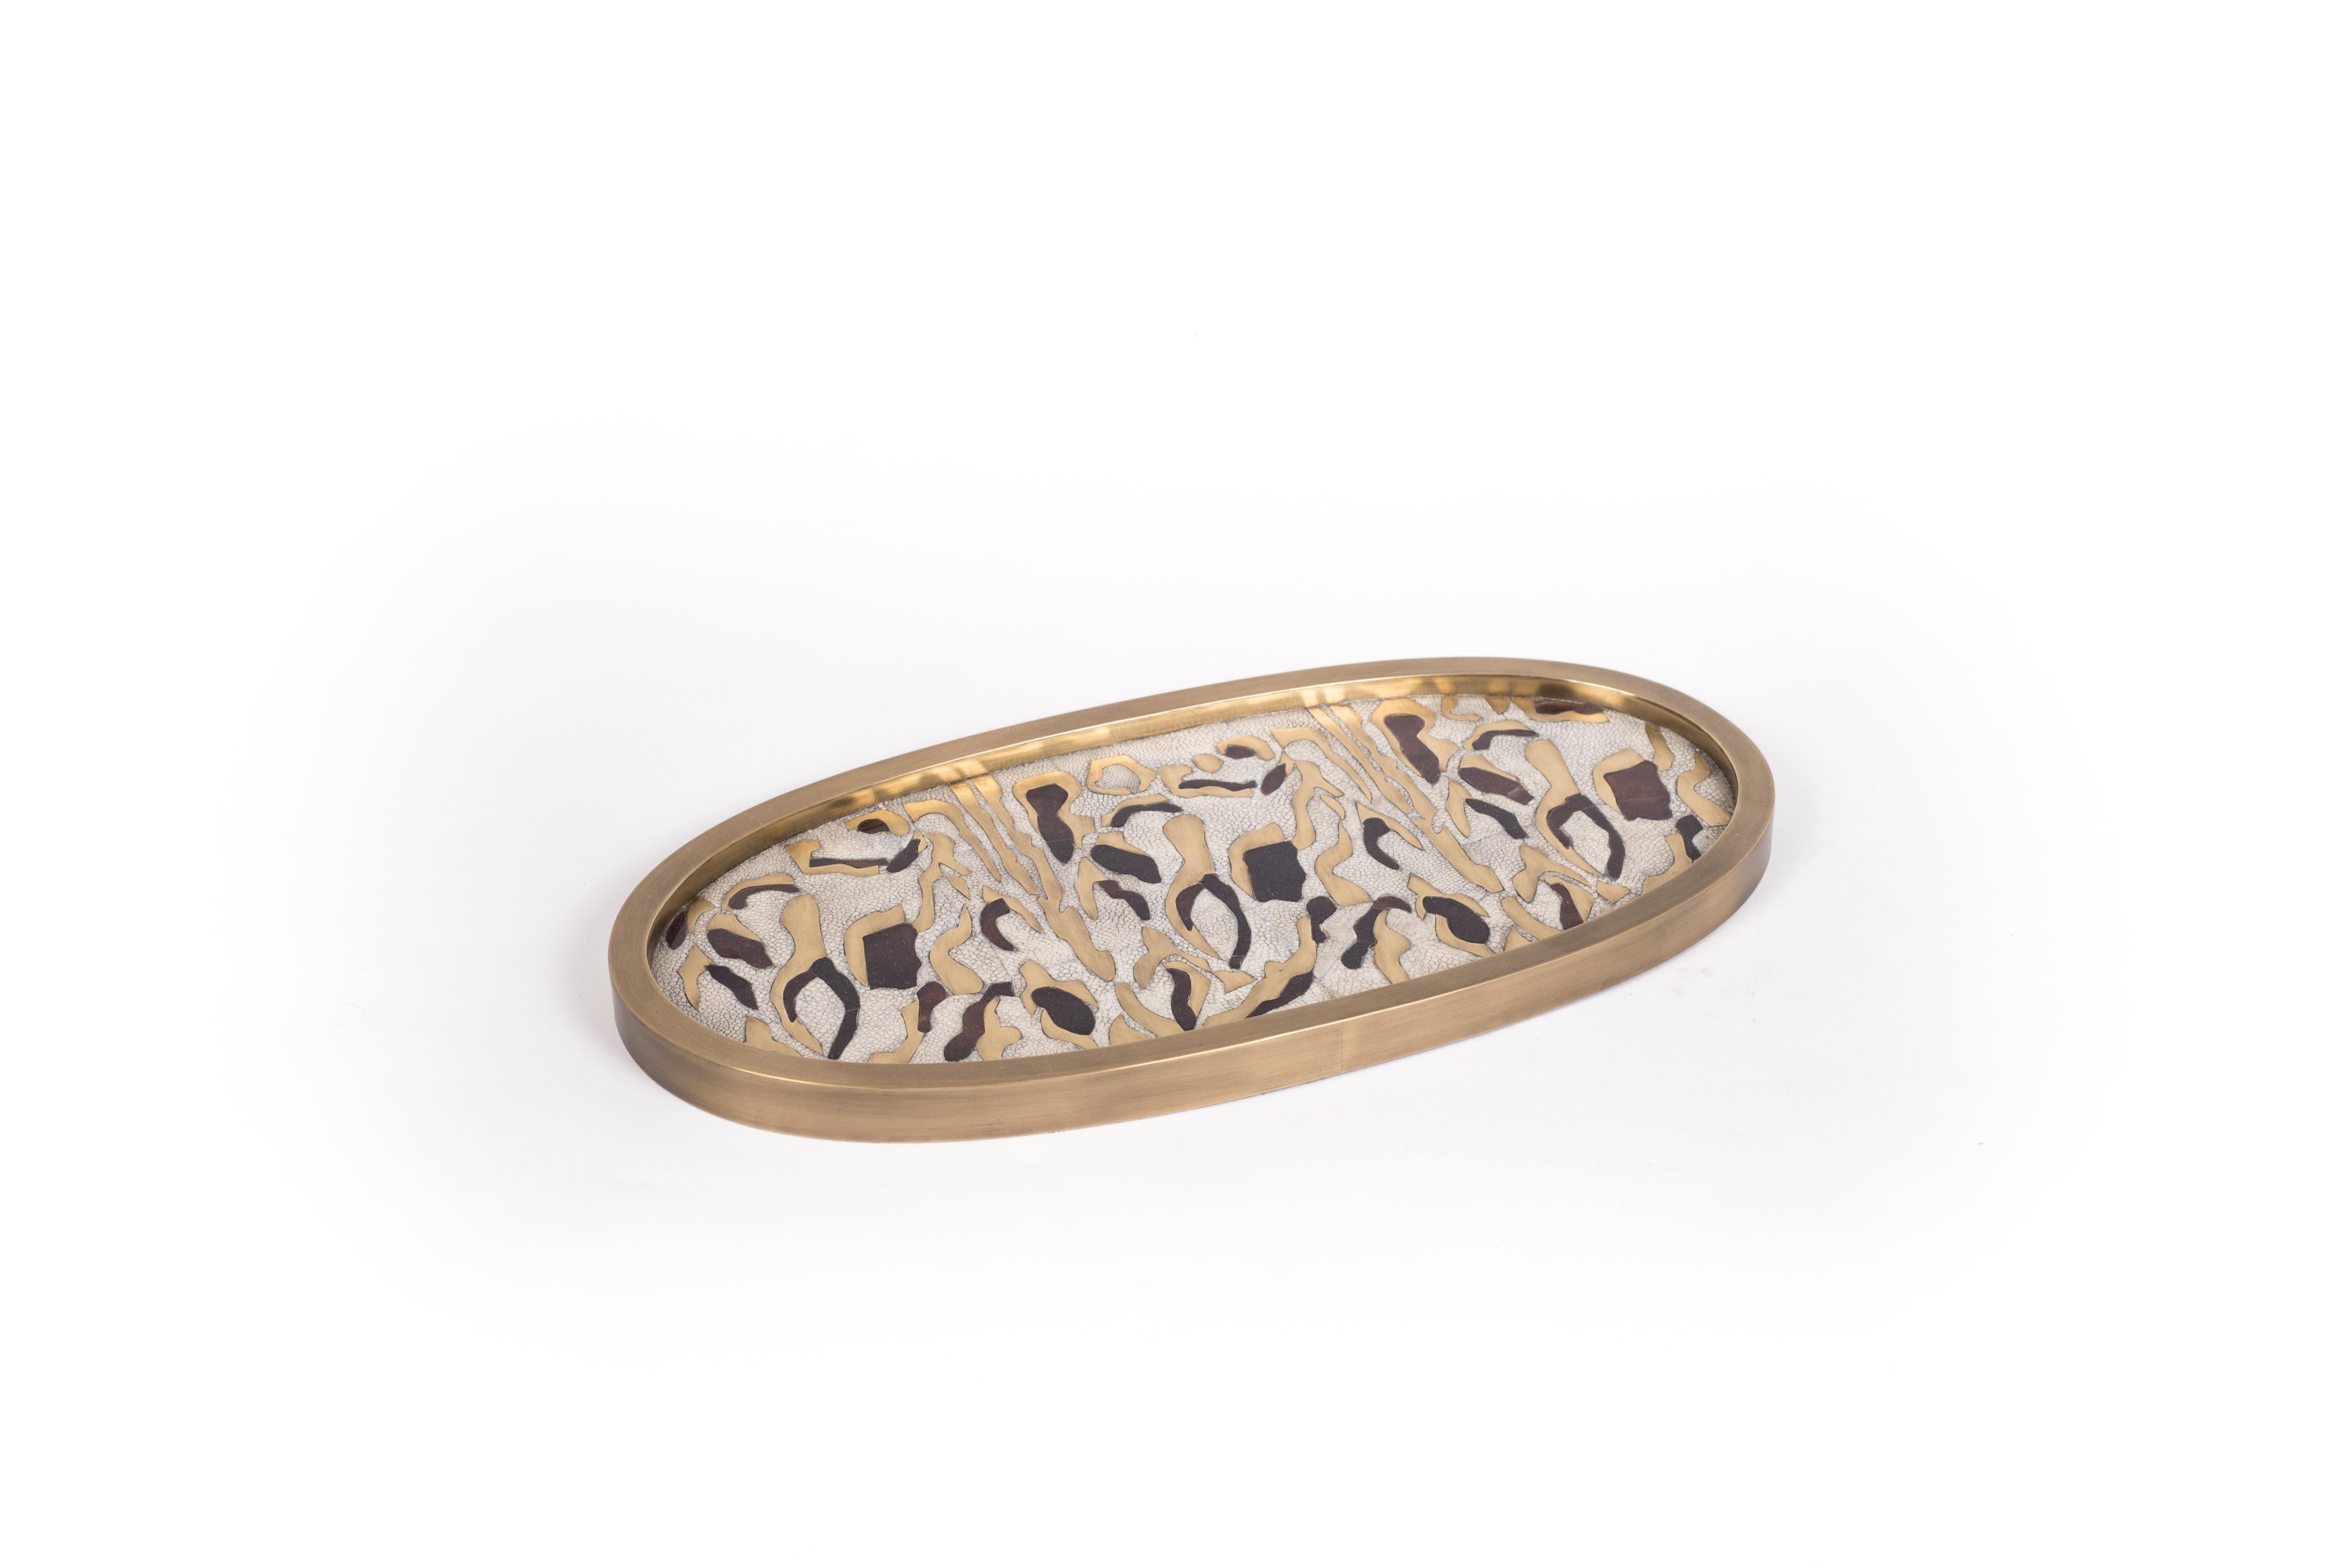 Hand-Crafted Shagreen Tray with Mix Inlay Pattern Including Shell and Brass by Kifu, Paris